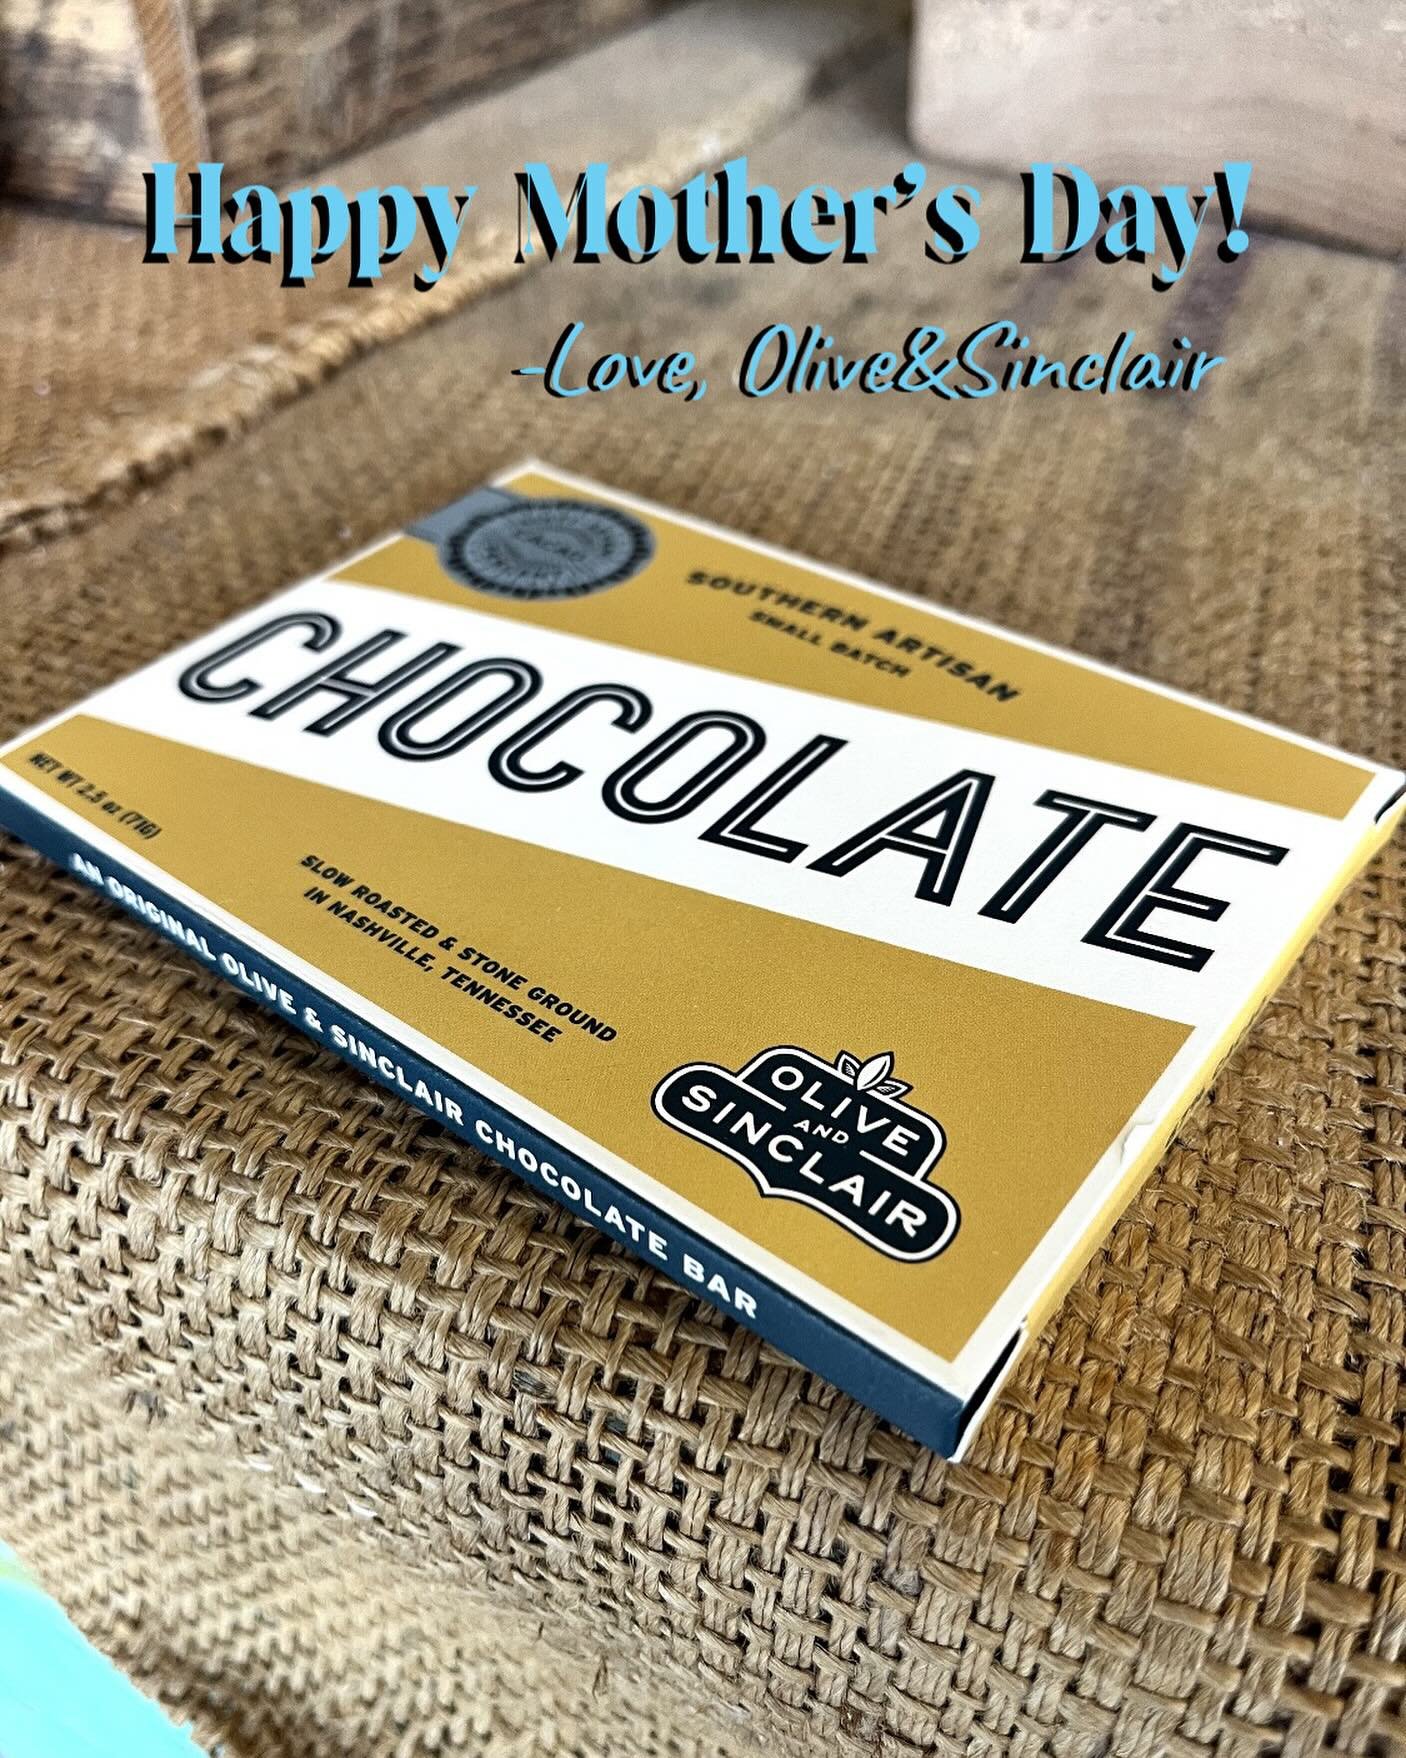 Happy Mother&rsquo;s Day to all of those amazing mom&rsquo;s out there! We hope you feel loved, celebrated, and spoiled 🫶🏼&bull;
&bull;
#oliveandsinclair #chocolate #chocolatemaker #mothersday #happymothersday #thankyoumoms